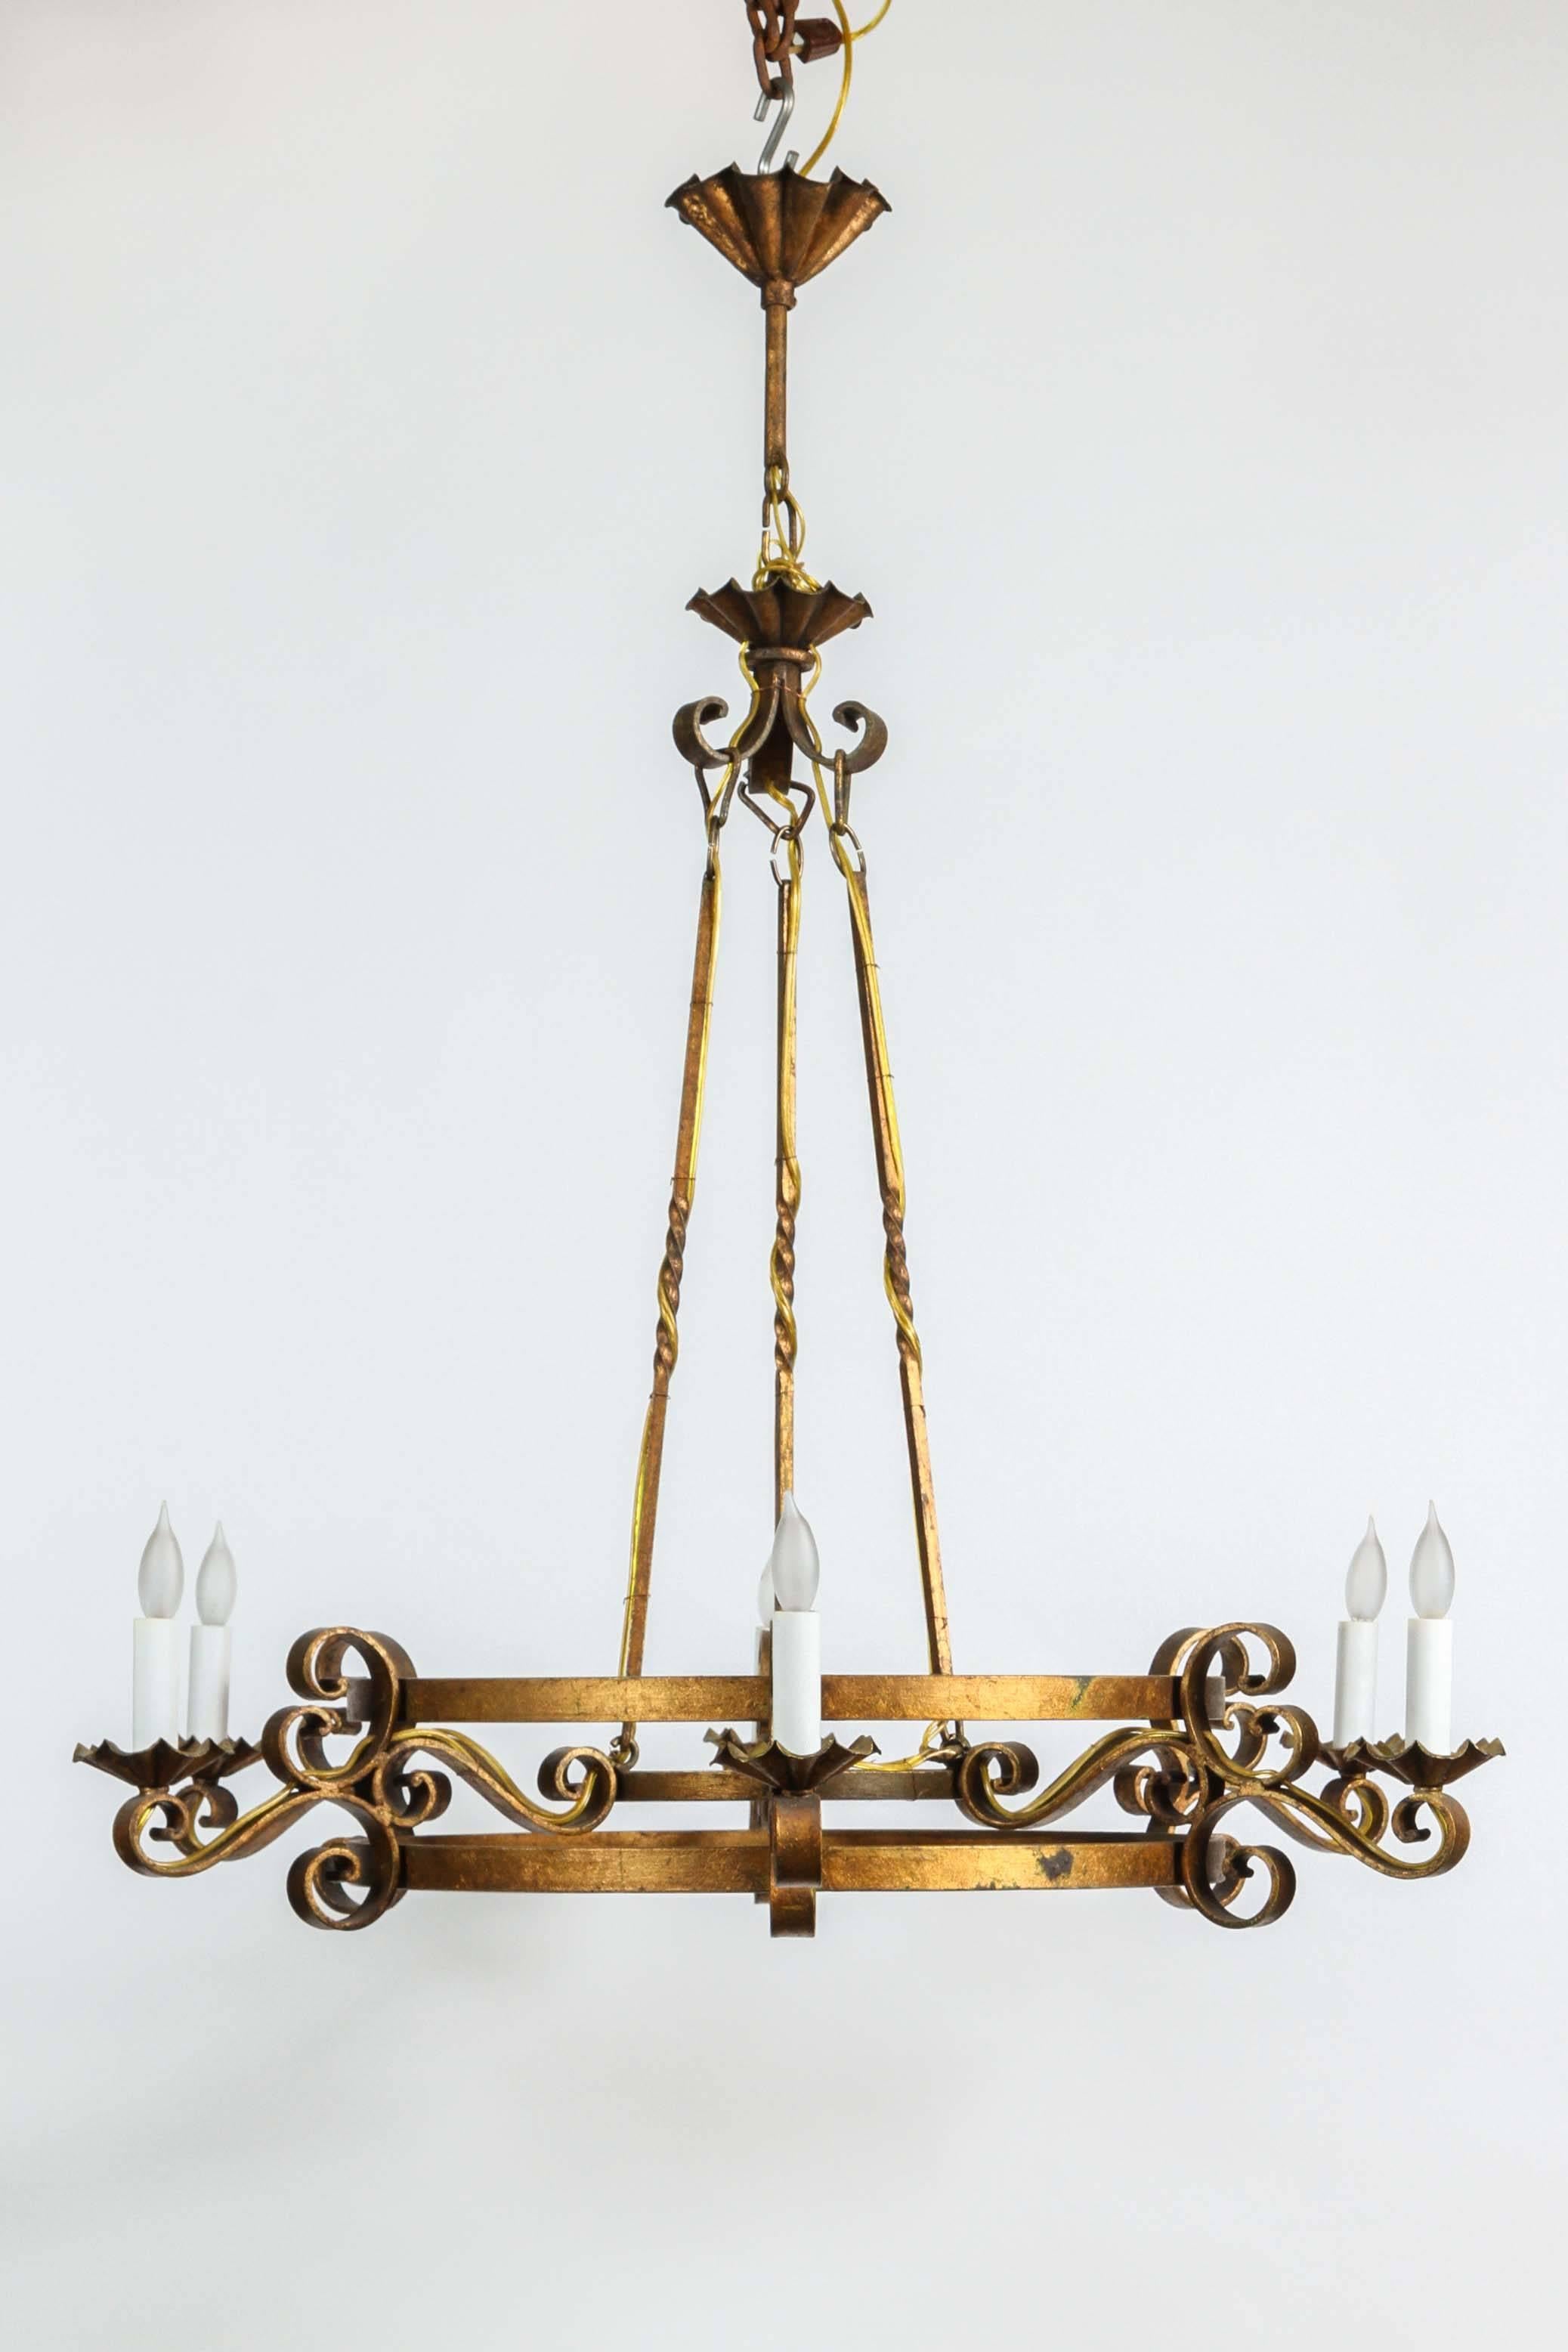 This 1970s wrought iron chandelier has an antique gold finish. Six lights. This can be seen at our 1800 South Grand Ave location in Downtown Los Angeles.